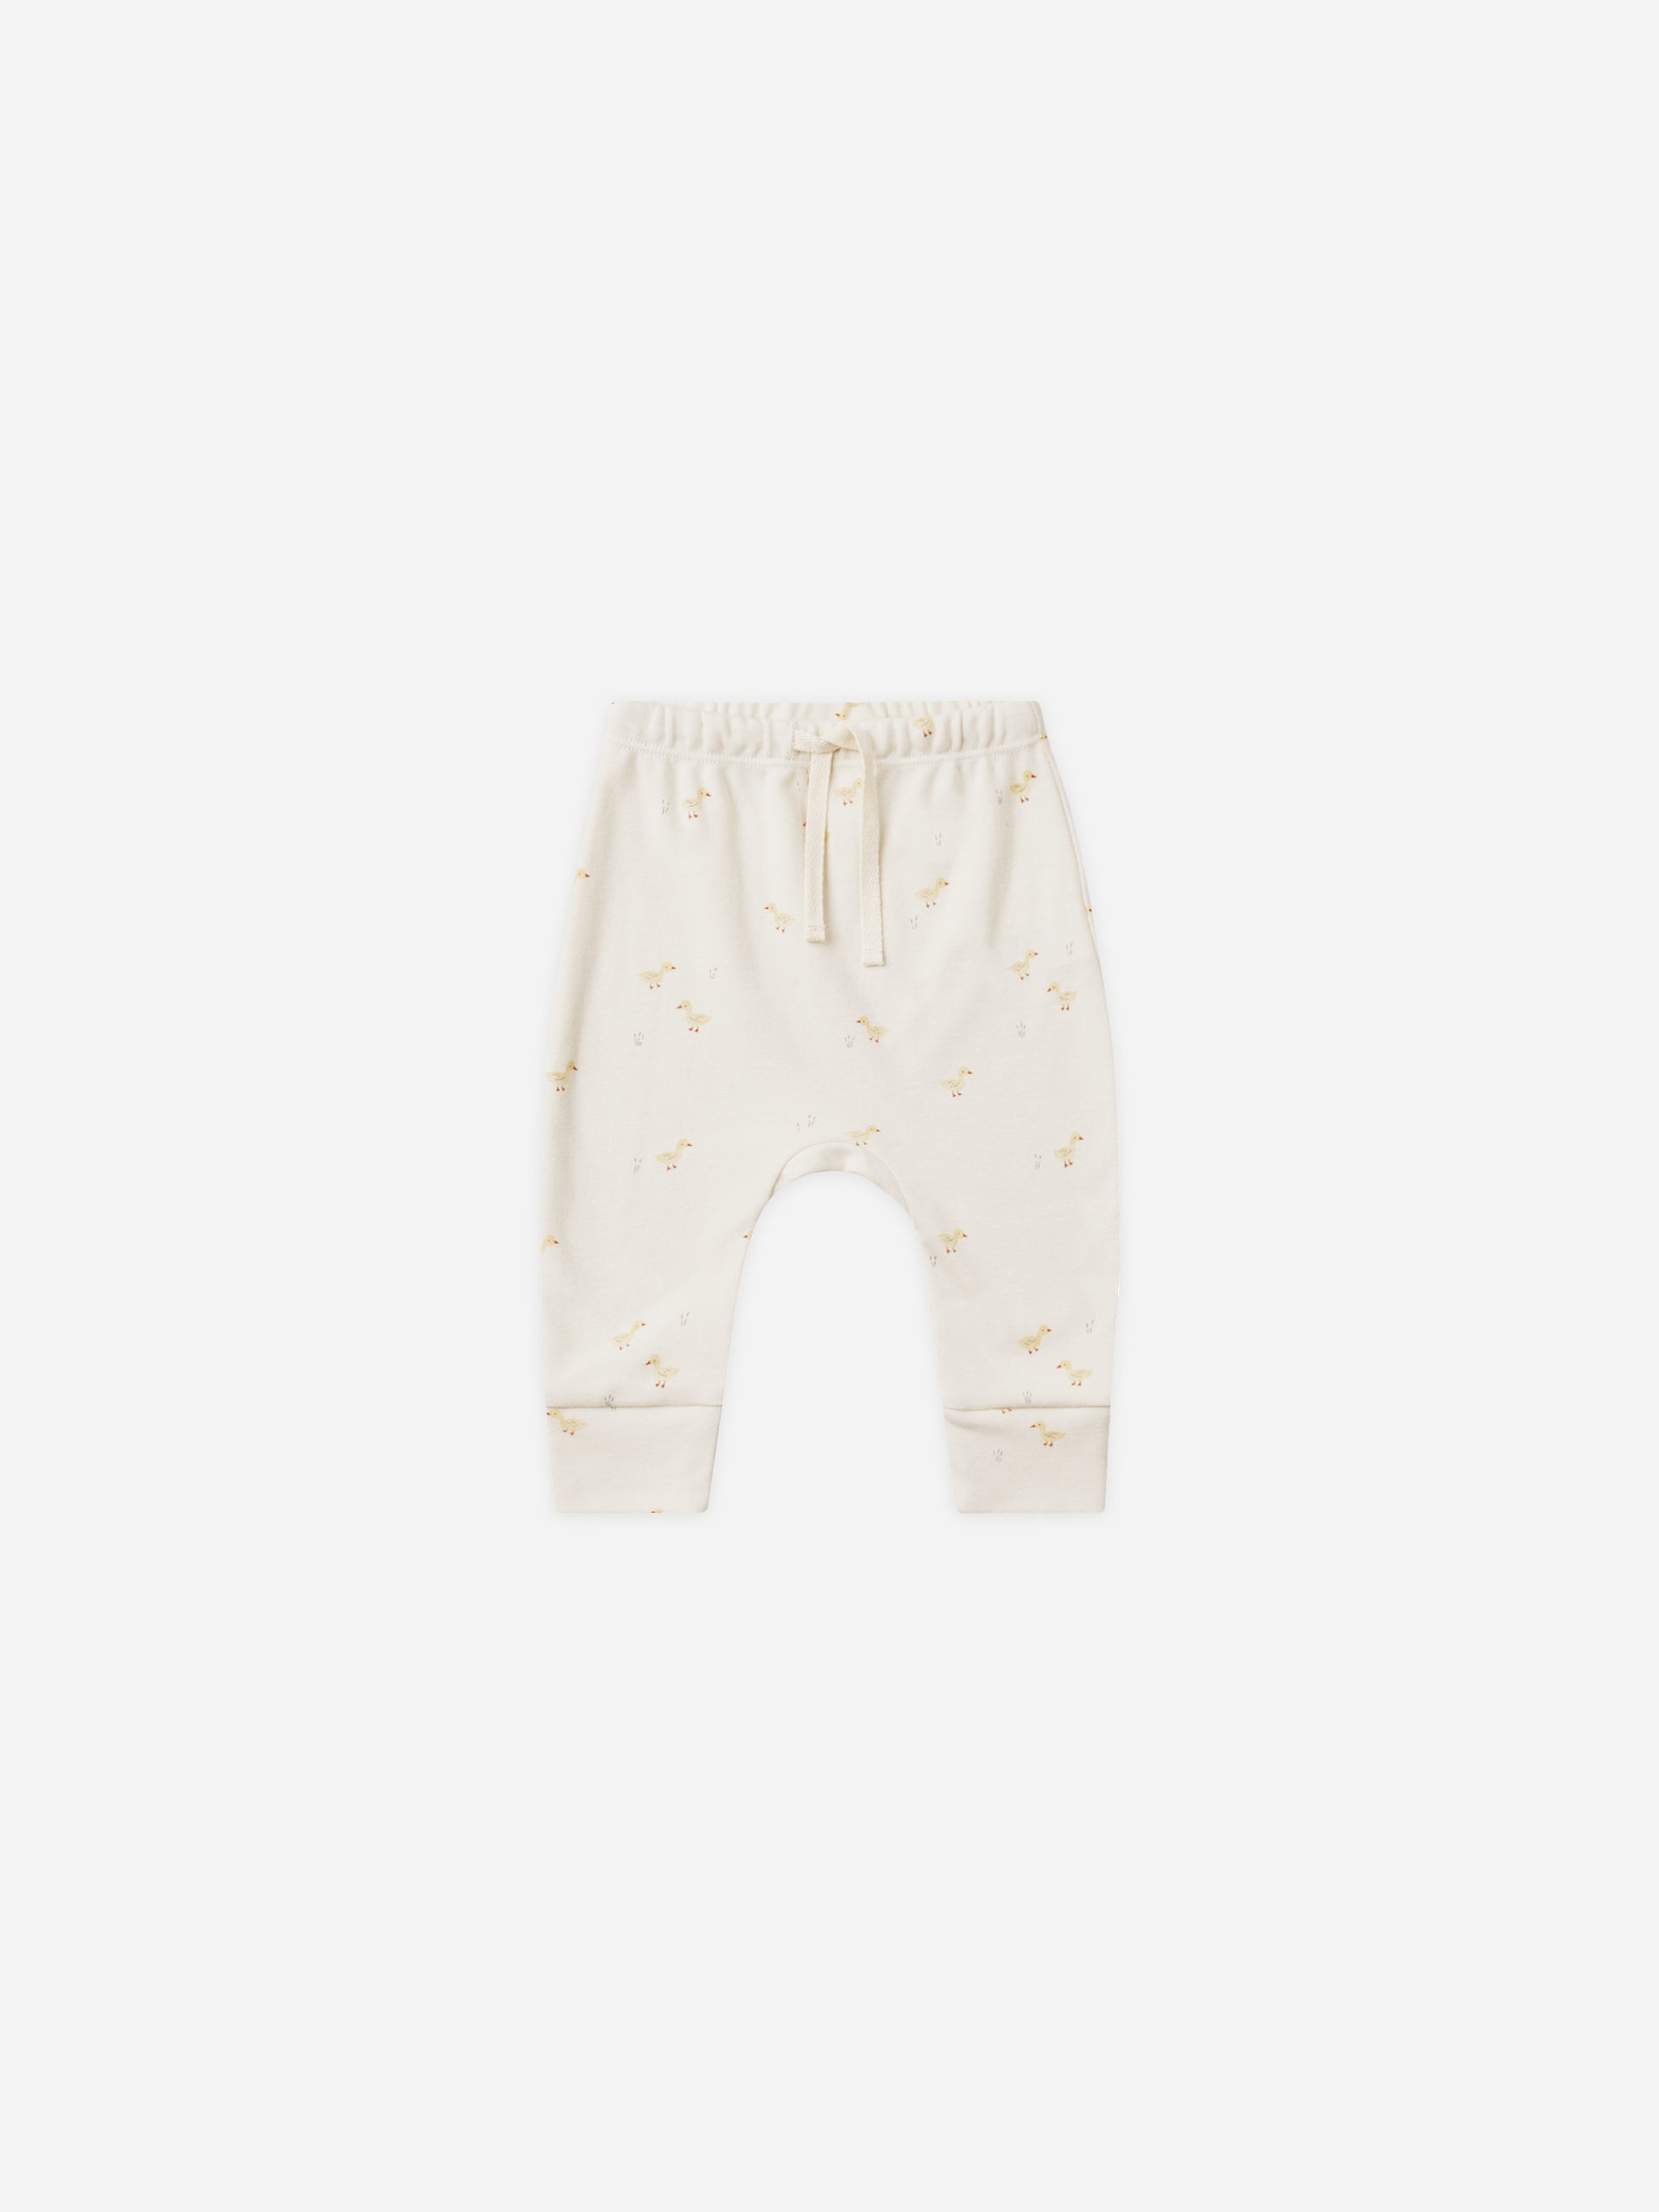 Drawstring Pants || Ducks - Rylee + Cru | Kids Clothes | Trendy Baby Clothes | Modern Infant Outfits |